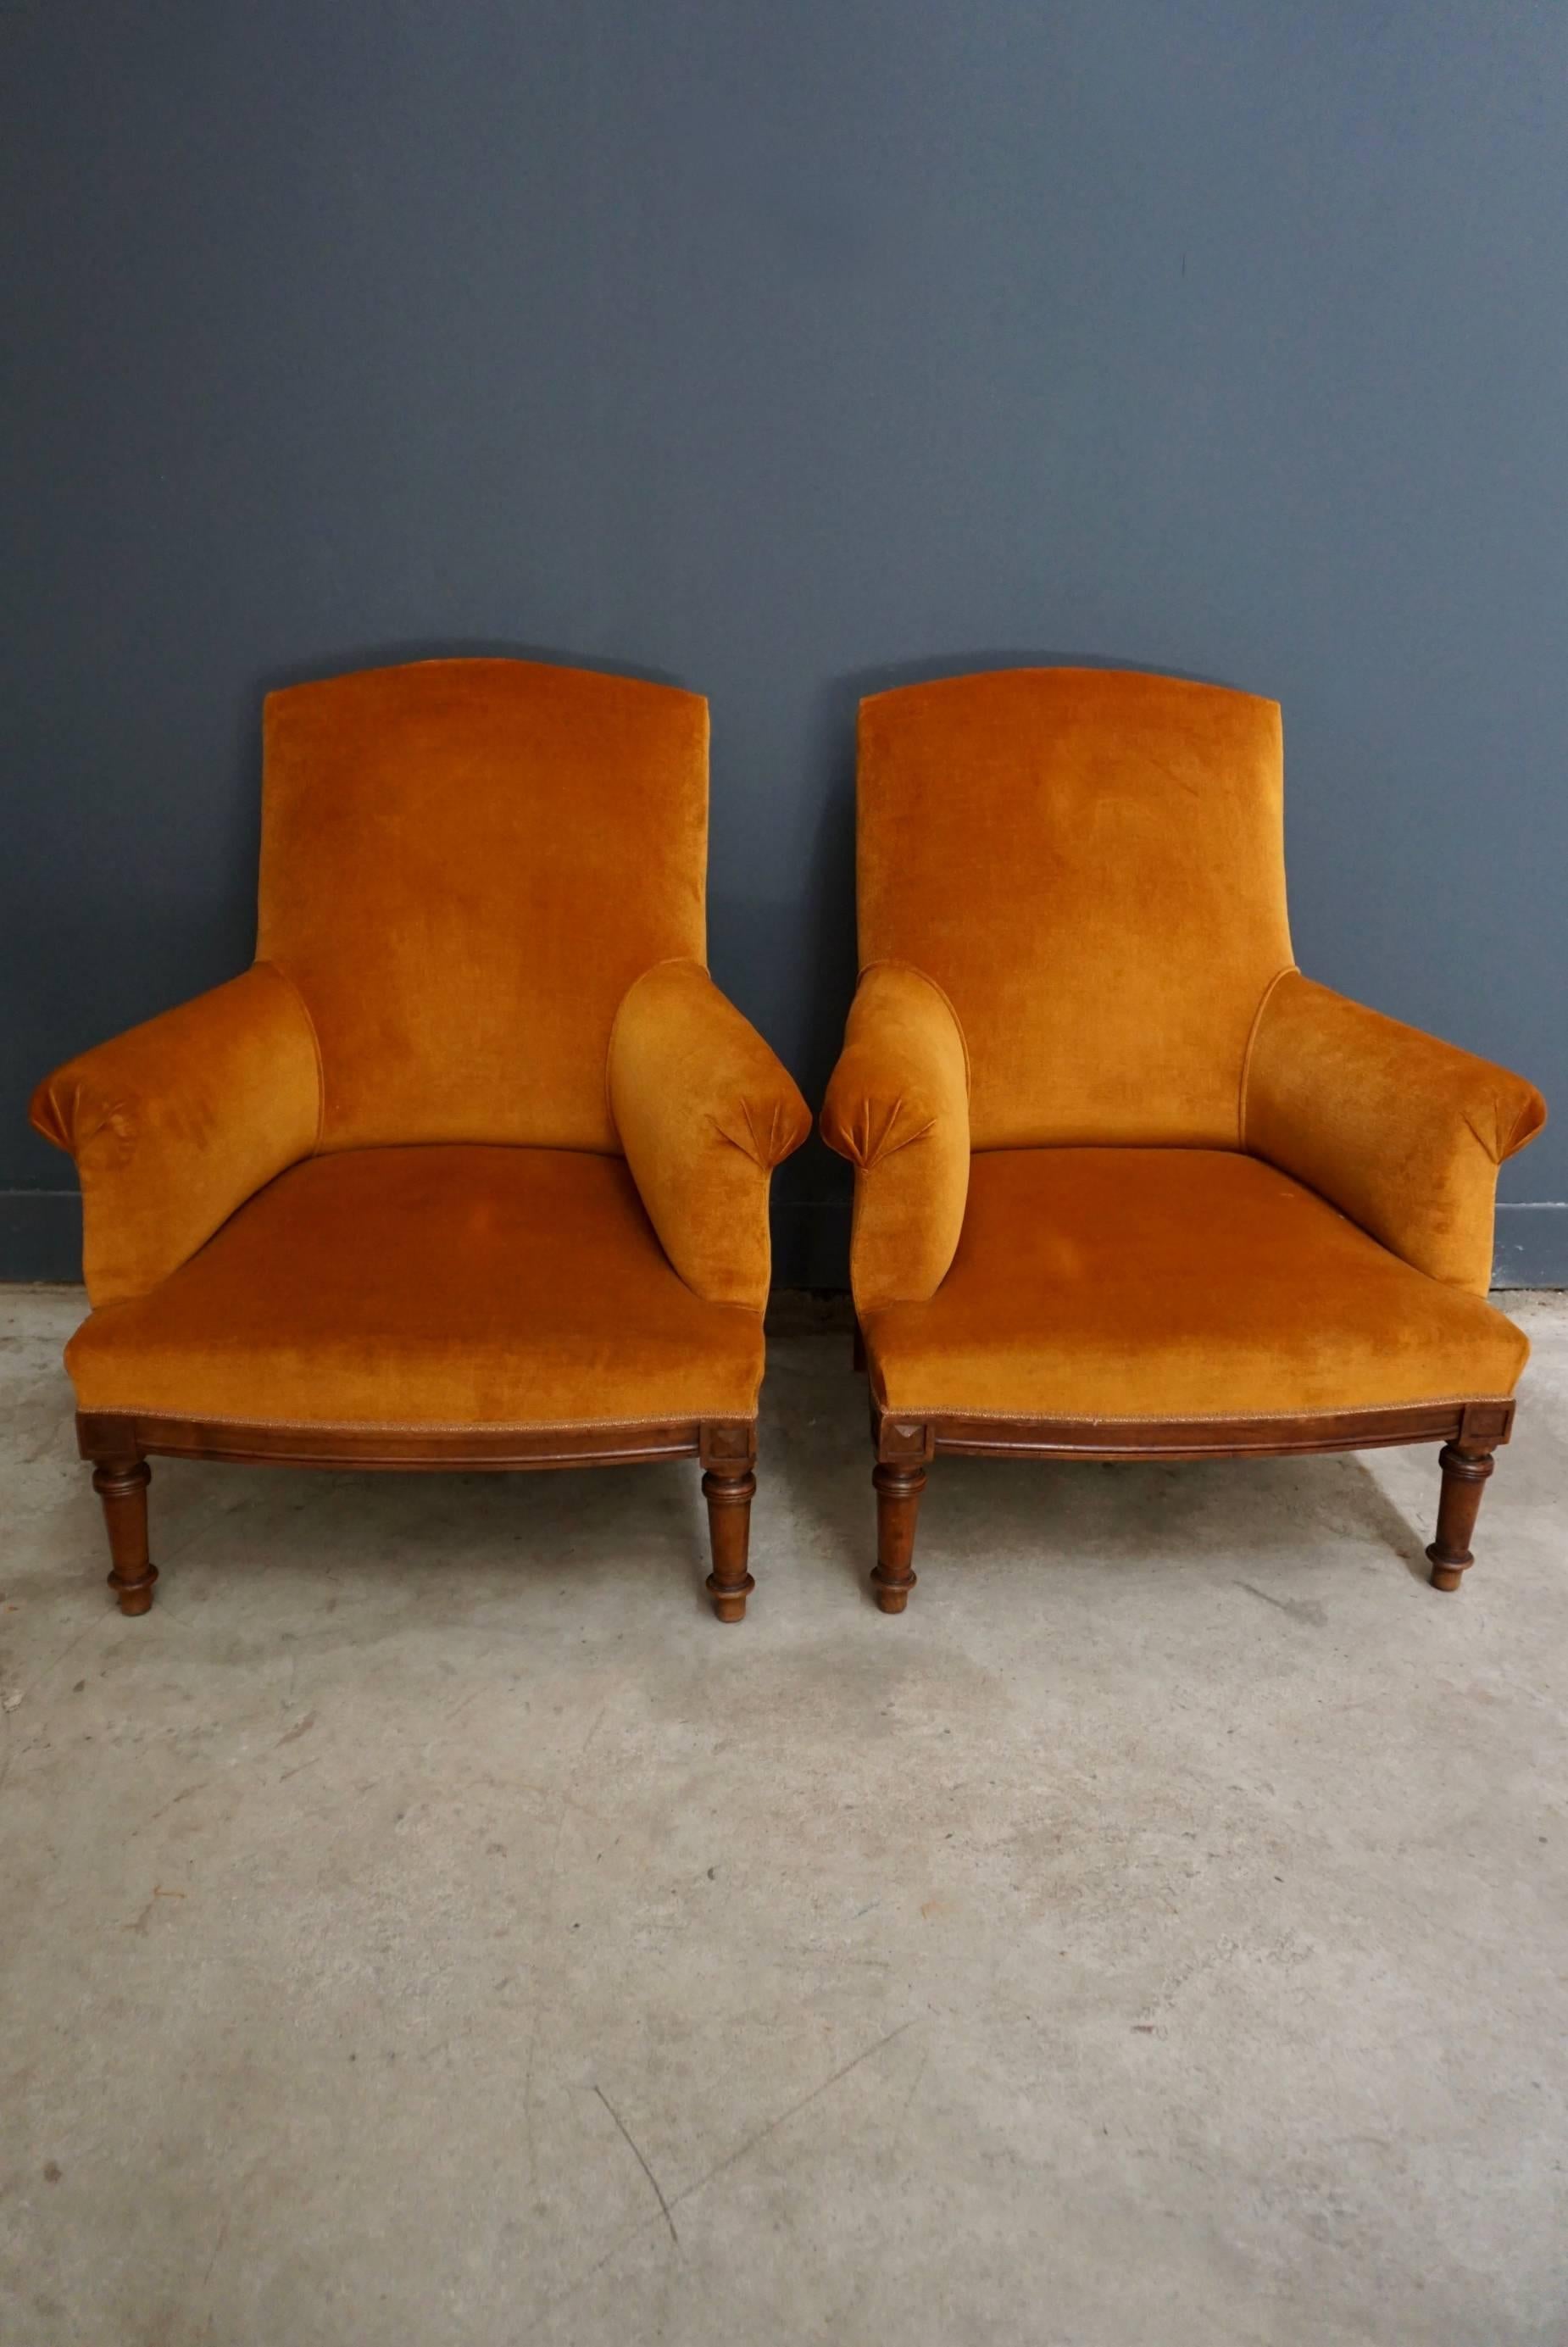 This pair of French velvet chairs were designed and made around the 1920-1930s in France. They feature a solid walnut base and a frame upholstered in most likely the original orange velvet. They are in a very good condition for their age and very